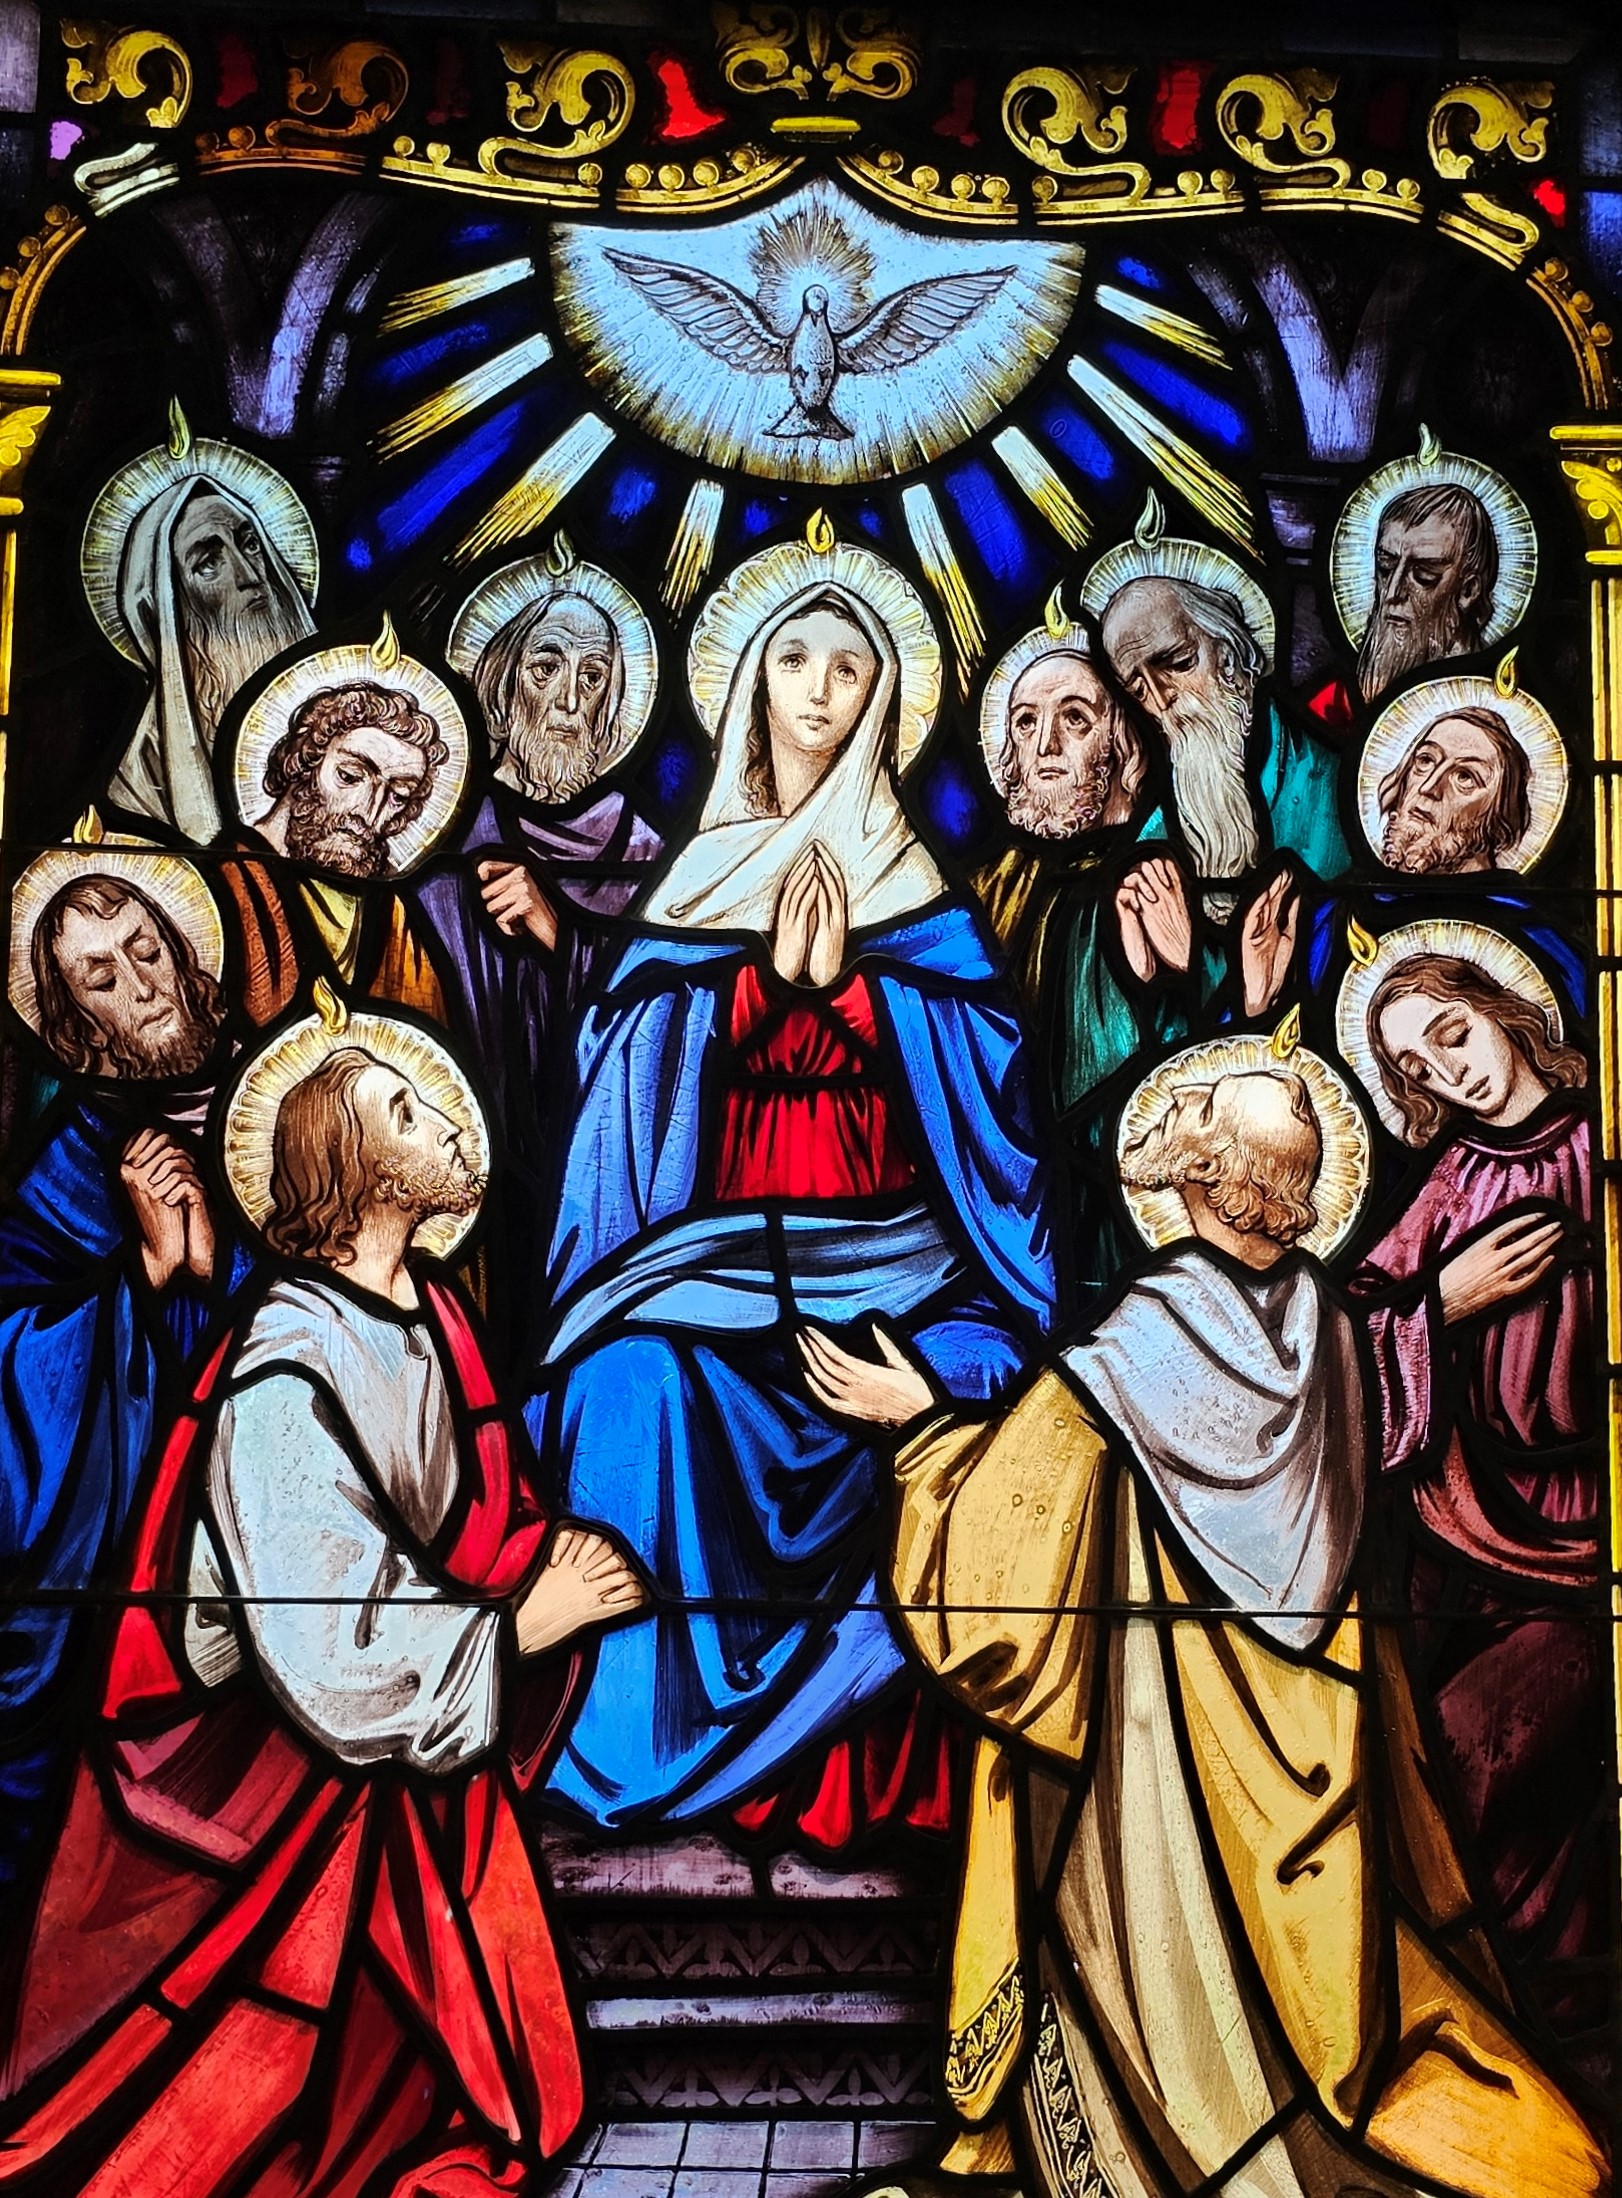 Pentecost: The Church’s Gathering in the Upper Room, Preceding its Mission to Proclaim to the Ends of the Earth